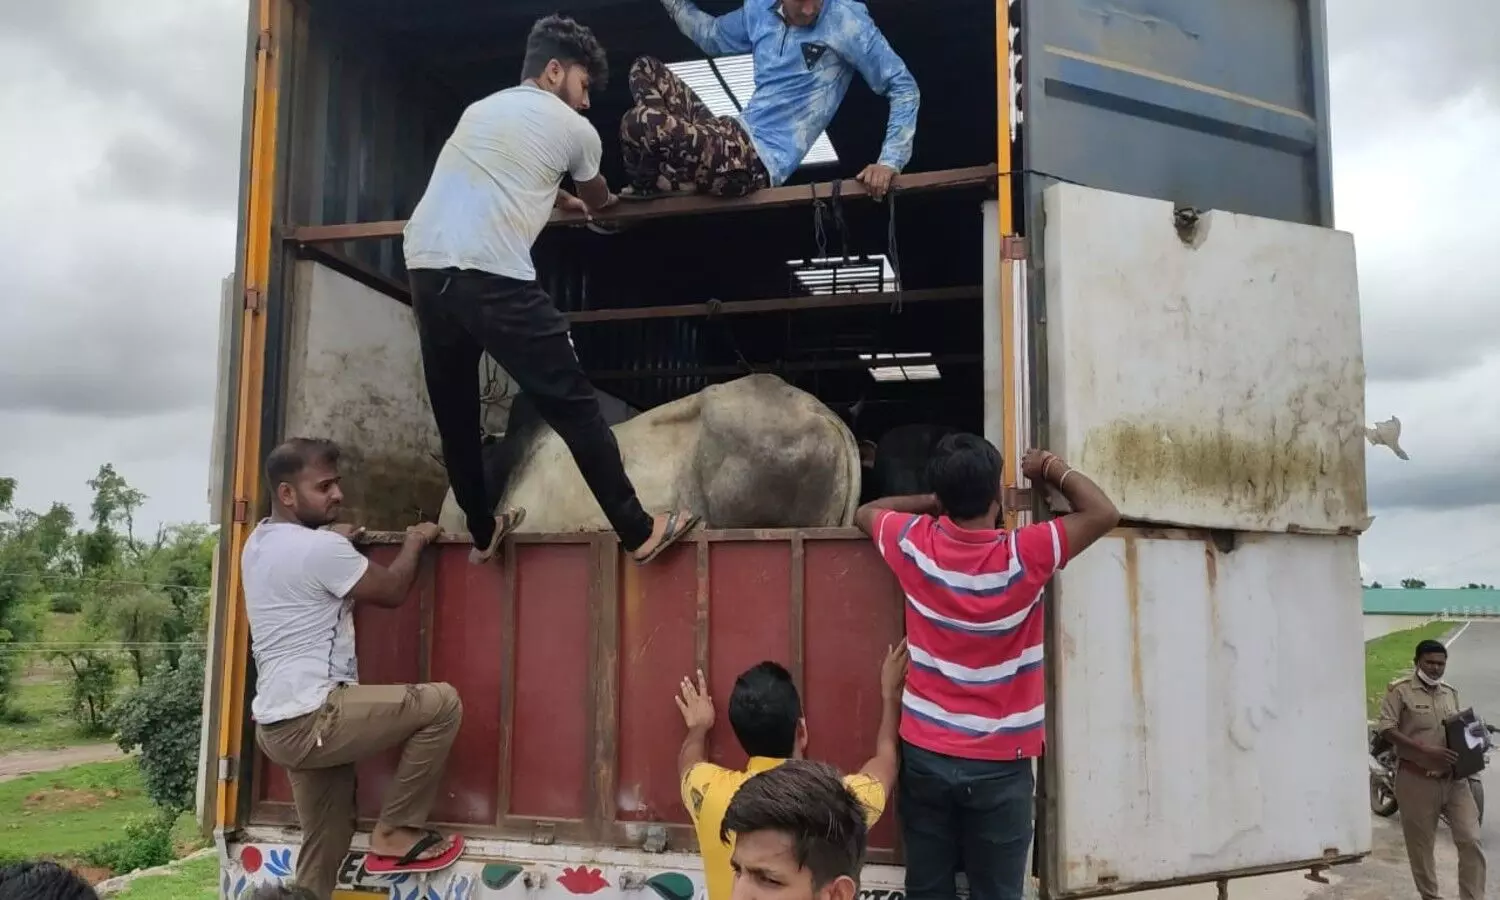 A truck full of cows was going from Rajasthan to Nagpur